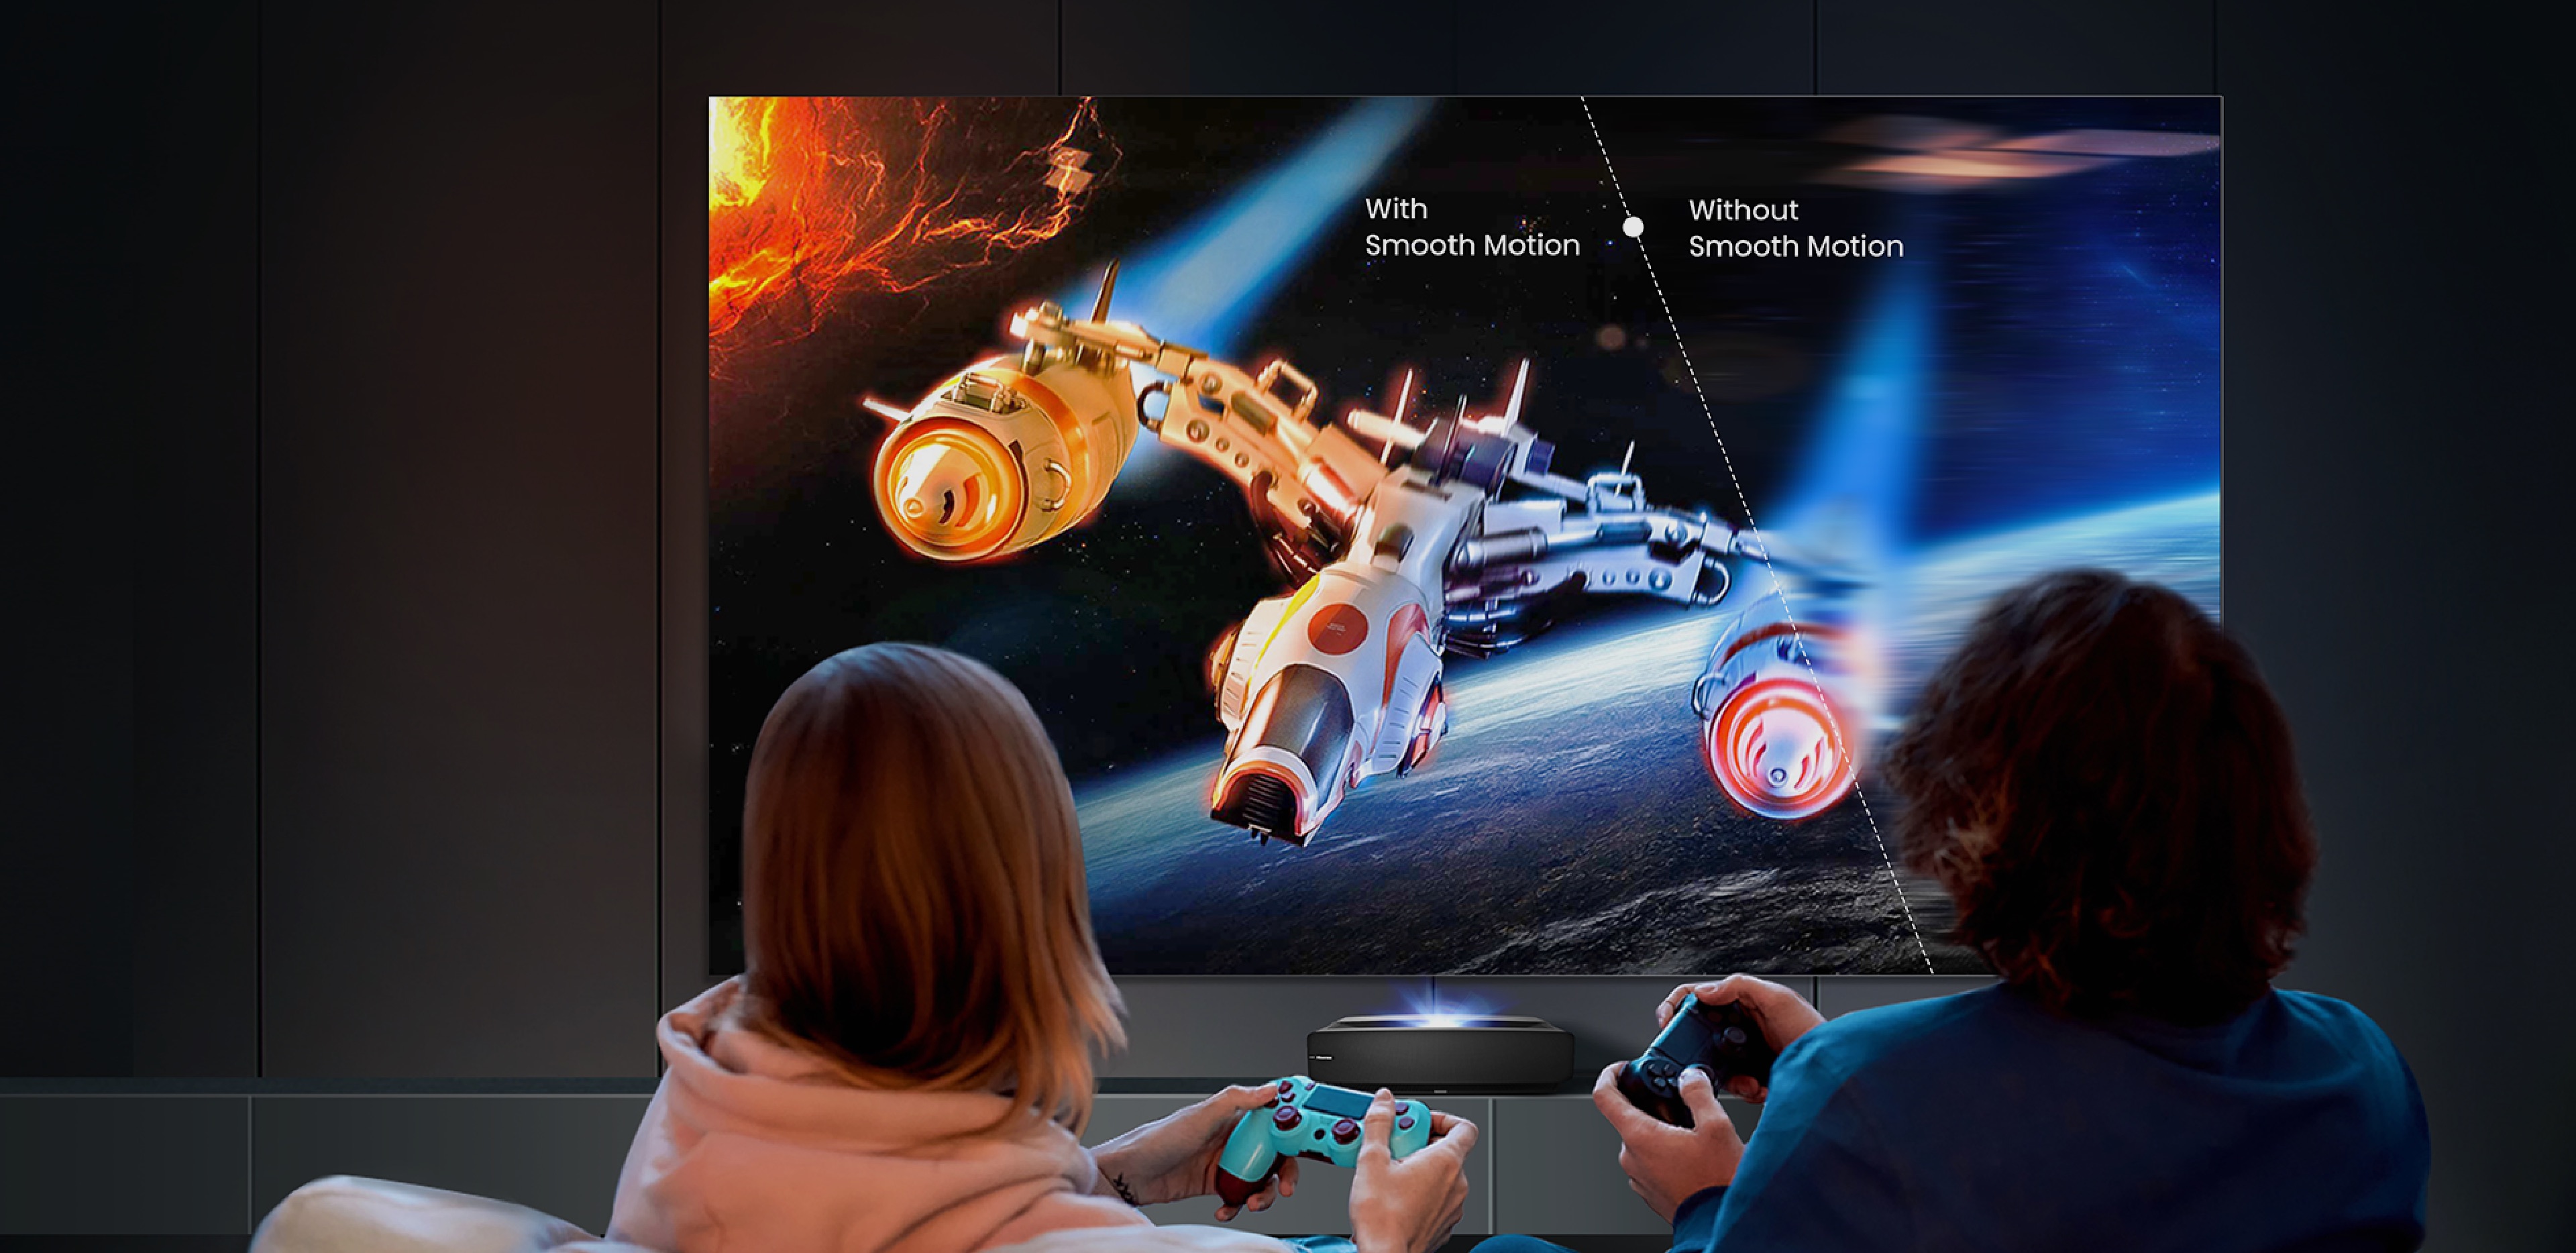 Hisense 120L5 - Capture every details of fast action games